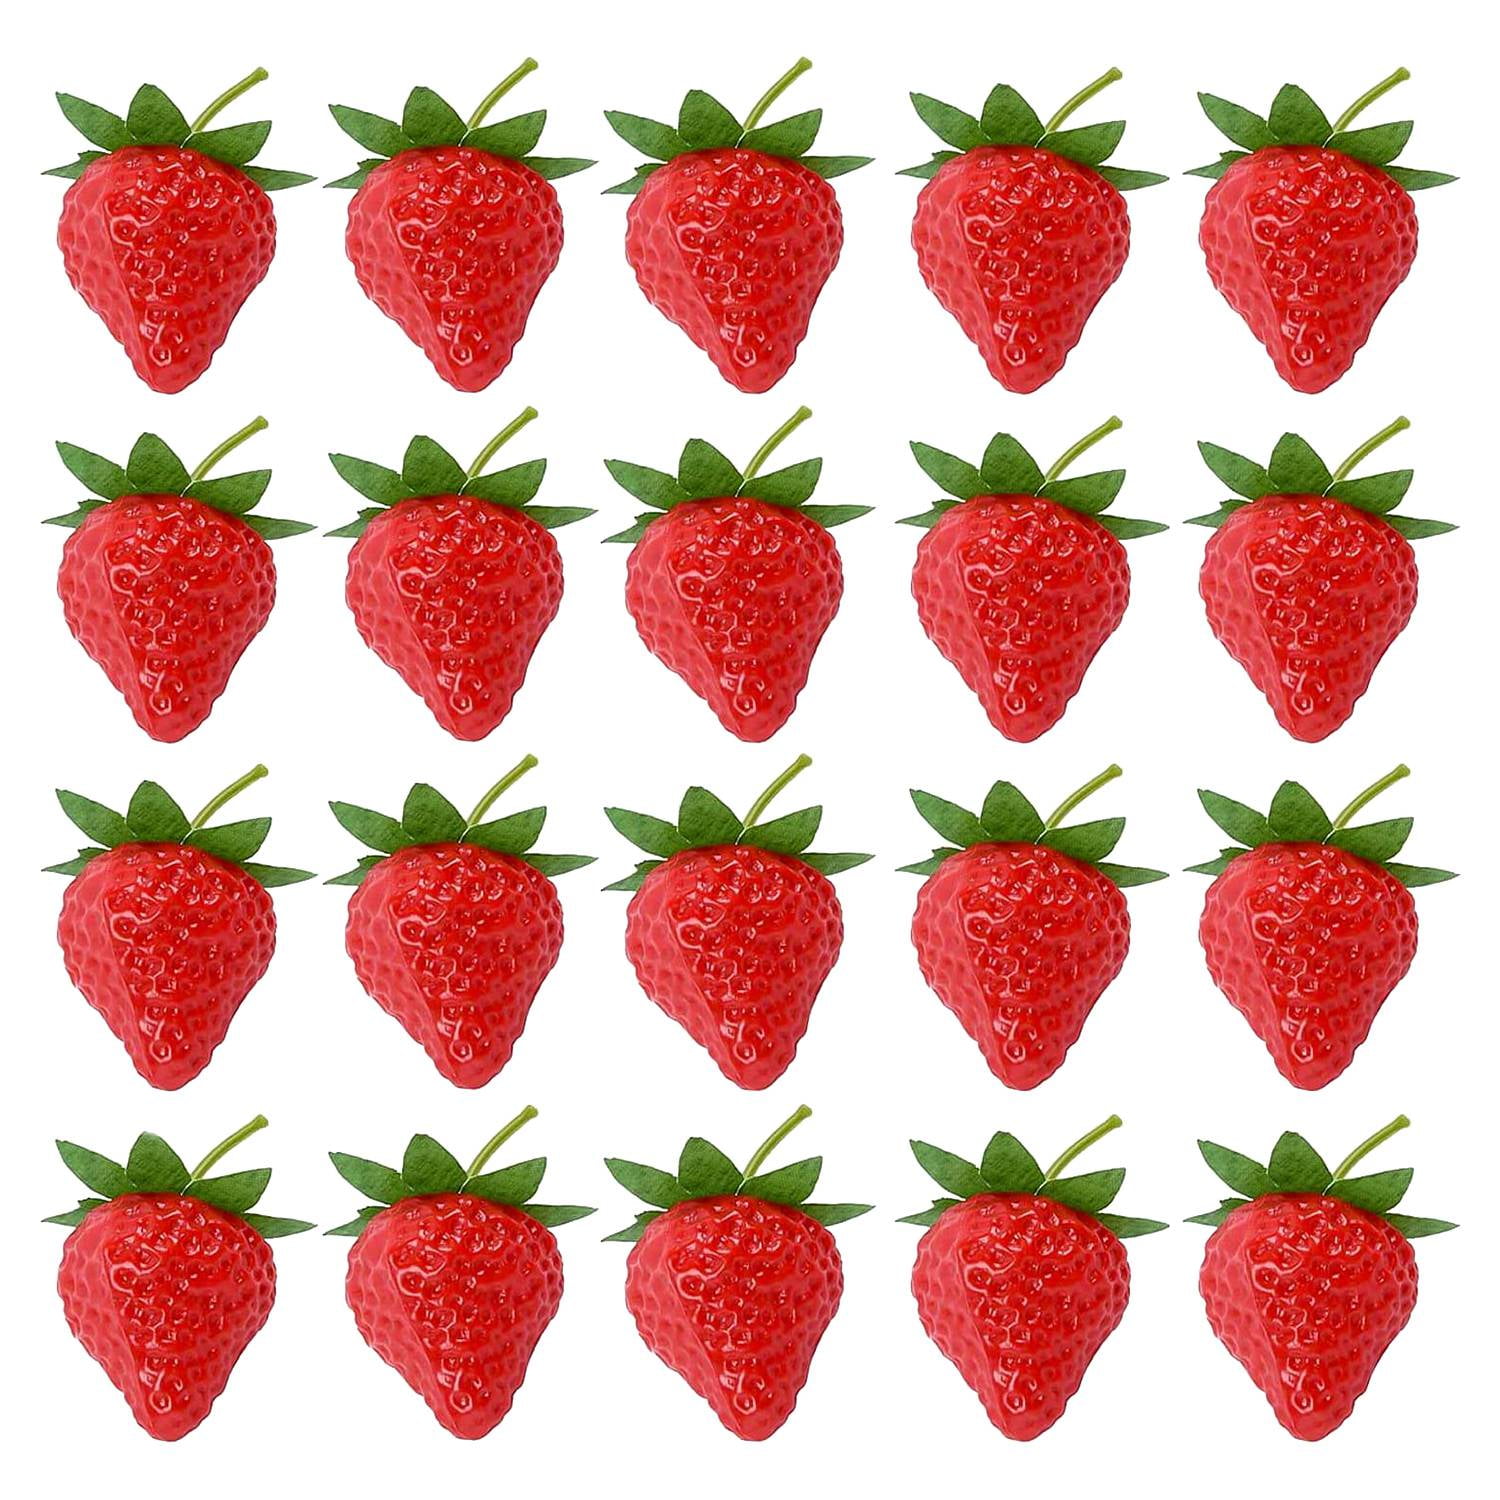 CUXIN Artificial Strawberries 20pcs Fake Strawberry Artificial Fruits Lifelike Red Strawberry for Decoration Arrangements Home Kitchen Decor 20pcs Mixed